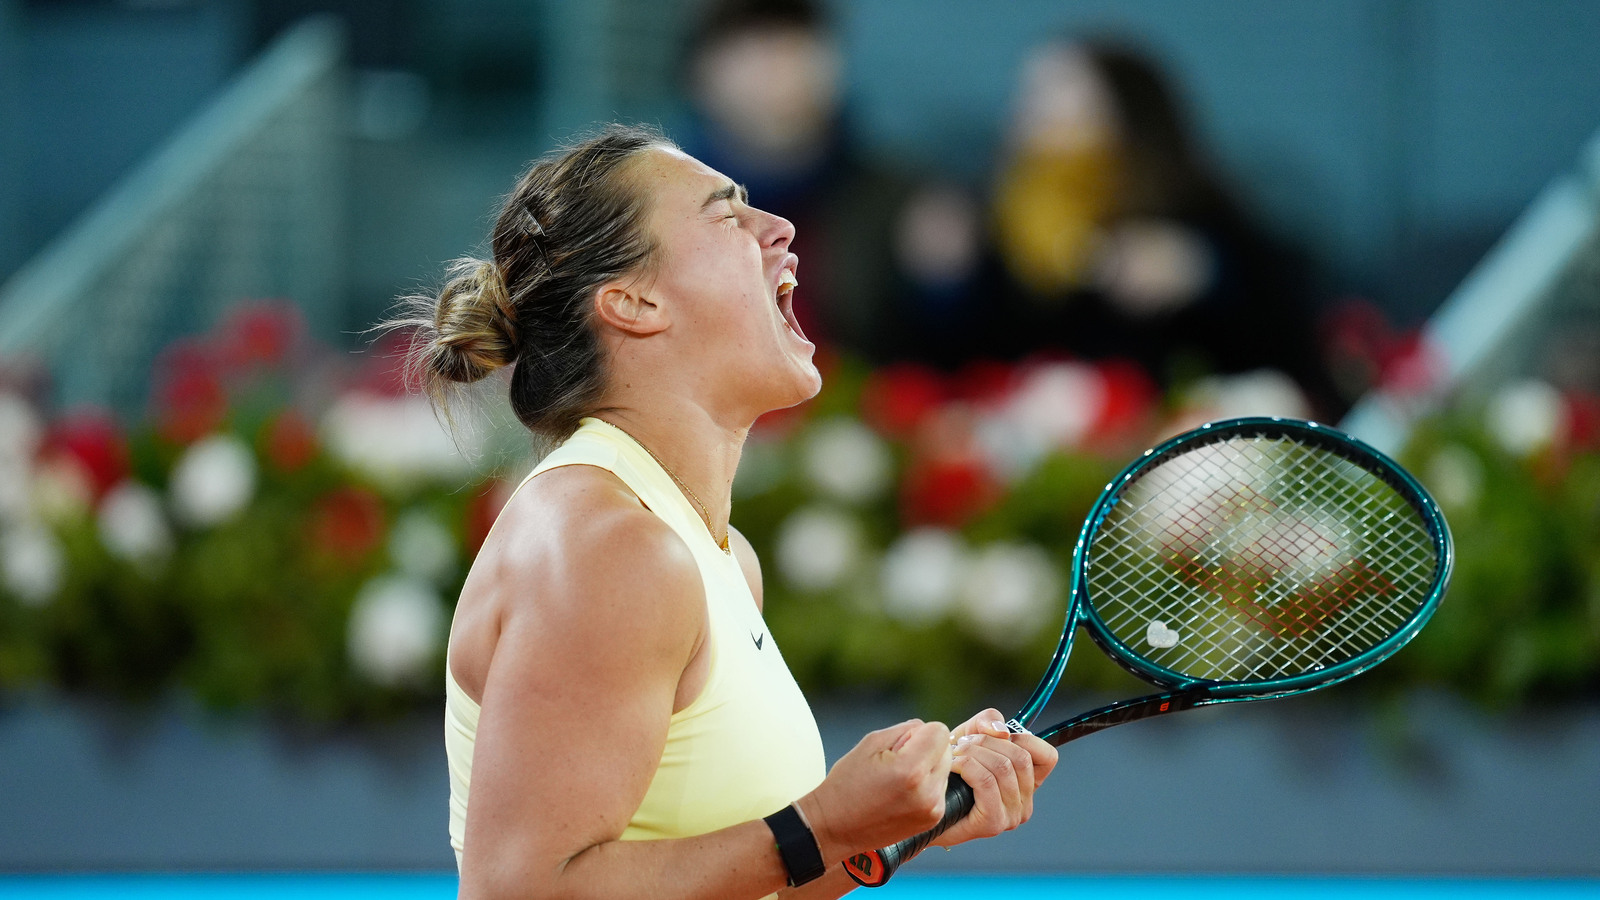 'I have to fight': Aryna Sabalenka comes back from a set down to beat Elena Rybakina in Madrid Open Semifinals